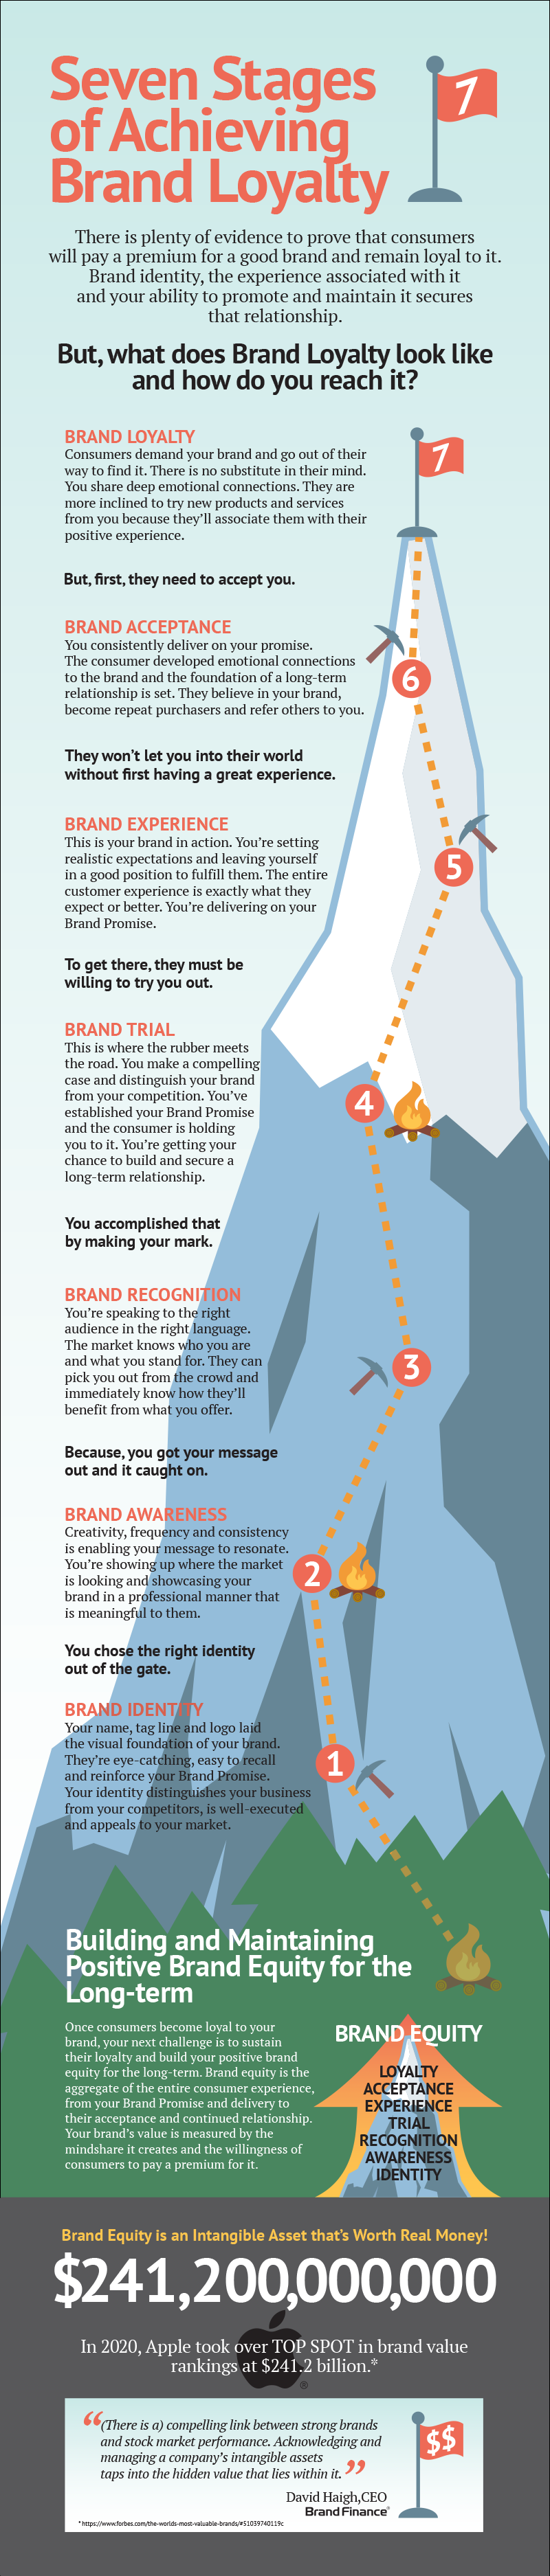 7 Stages of Brand Loyalty